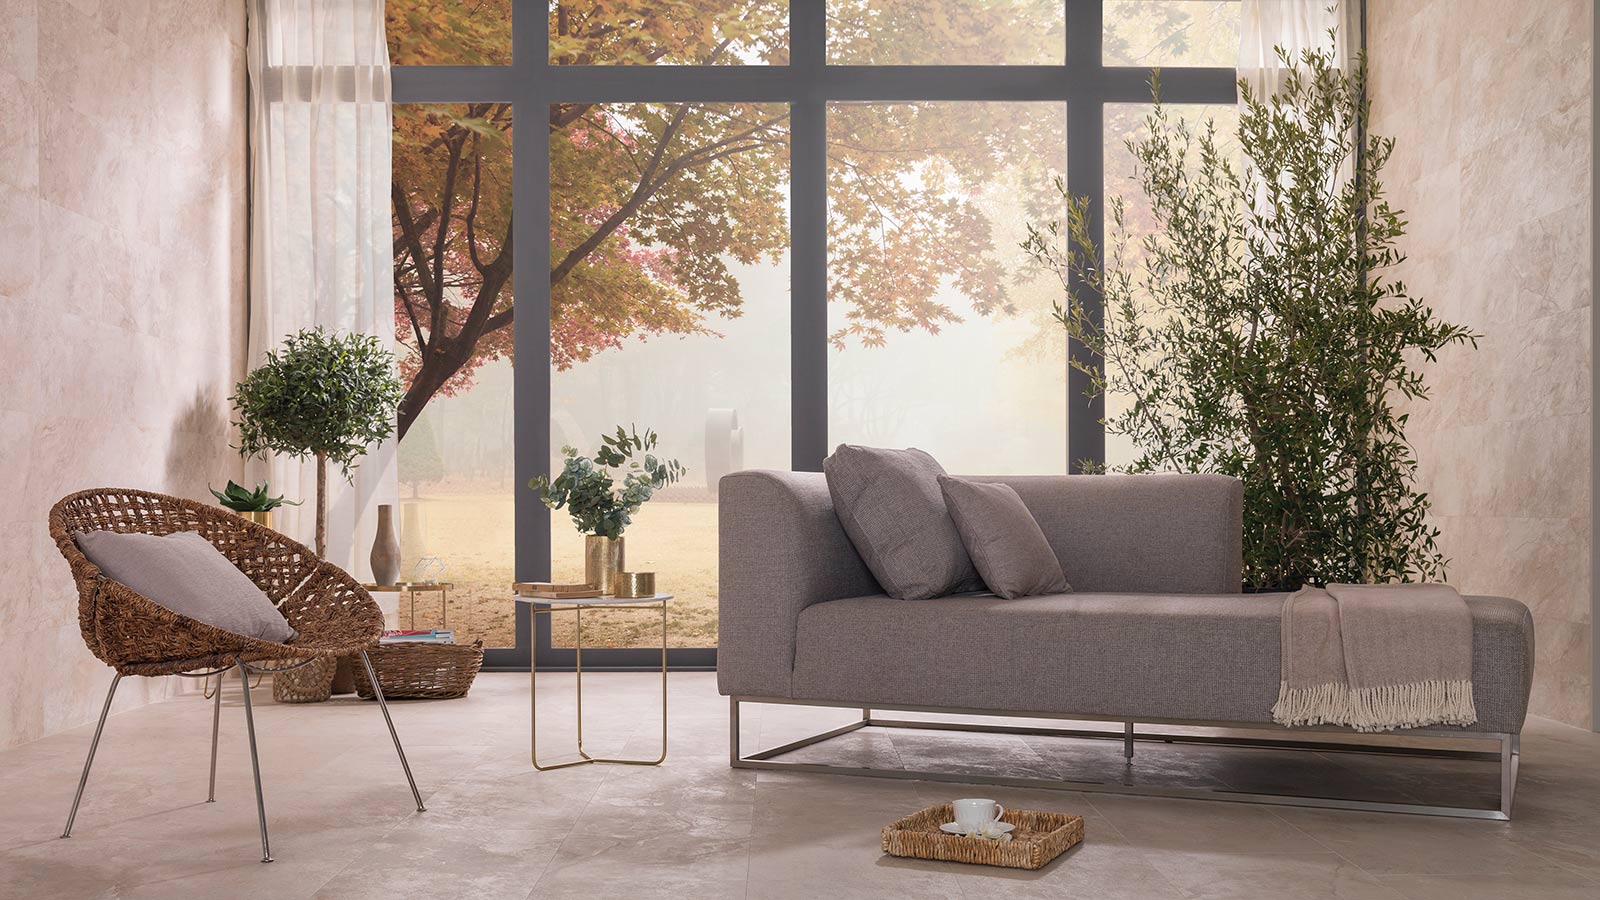 Interior design trends 2020, what the year ahead holds for home décor